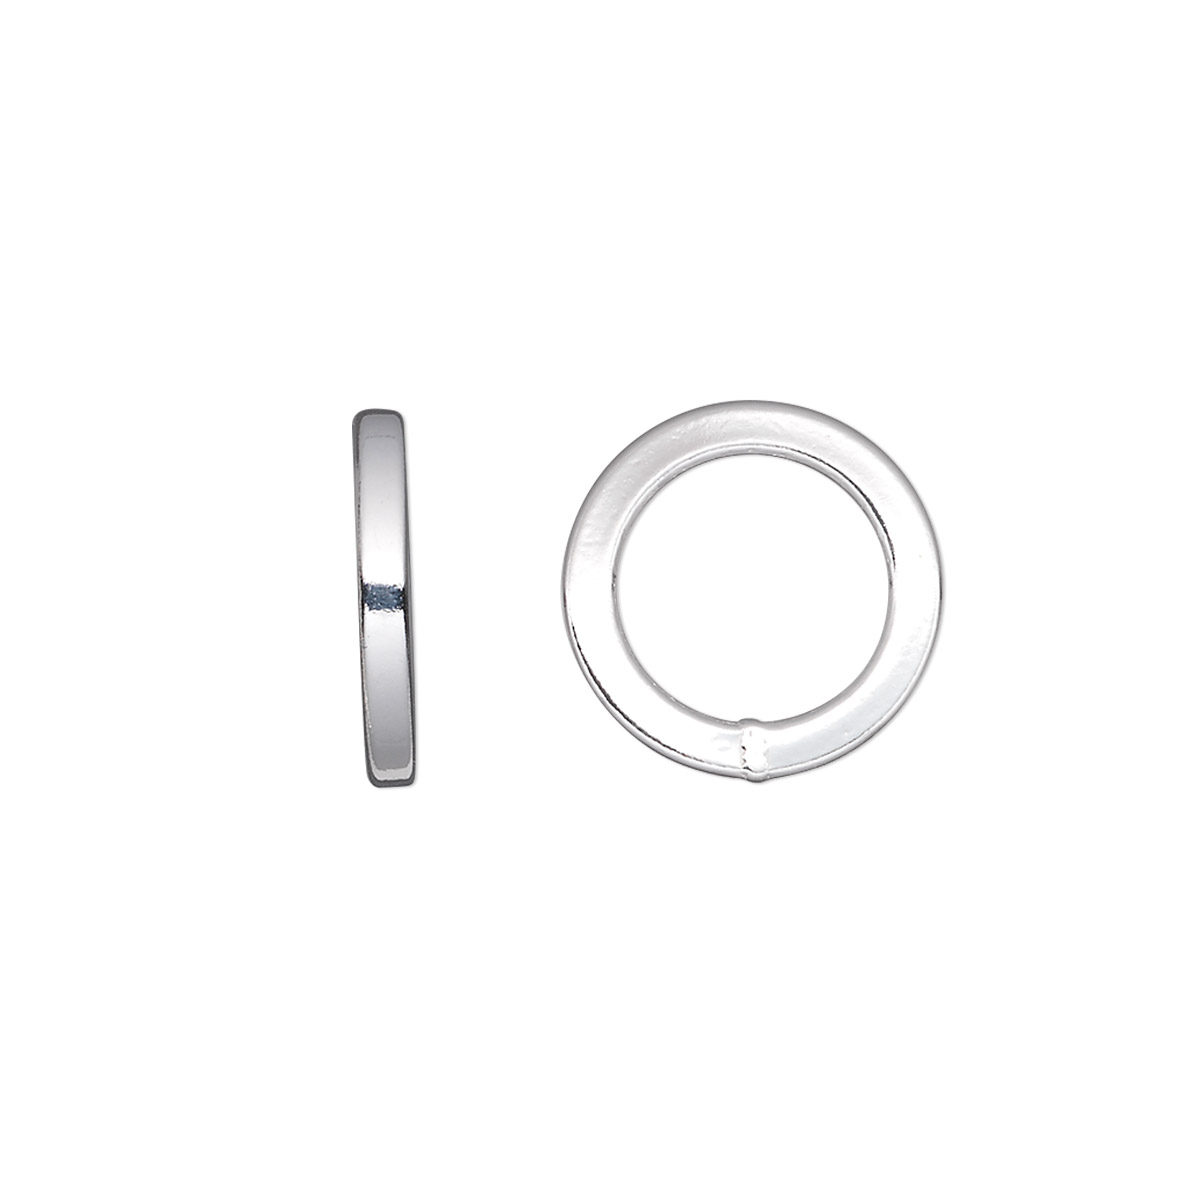 Jump ring, sterling silver, 14mm soldered round square wire, 9.8mm ...